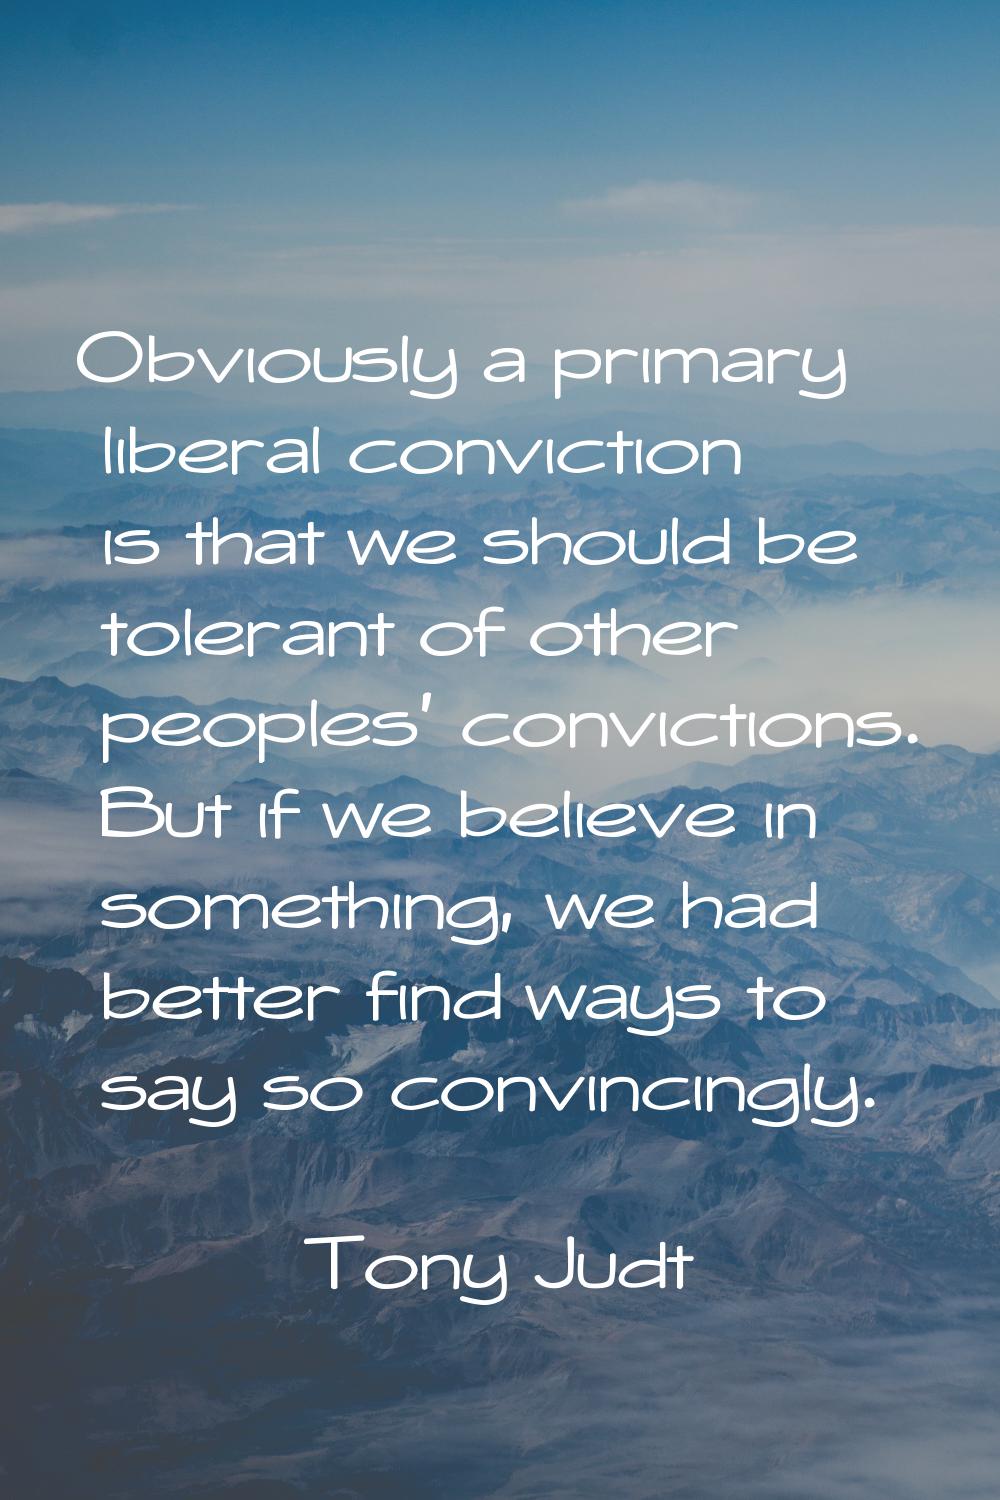 Obviously a primary liberal conviction is that we should be tolerant of other peoples' convictions.